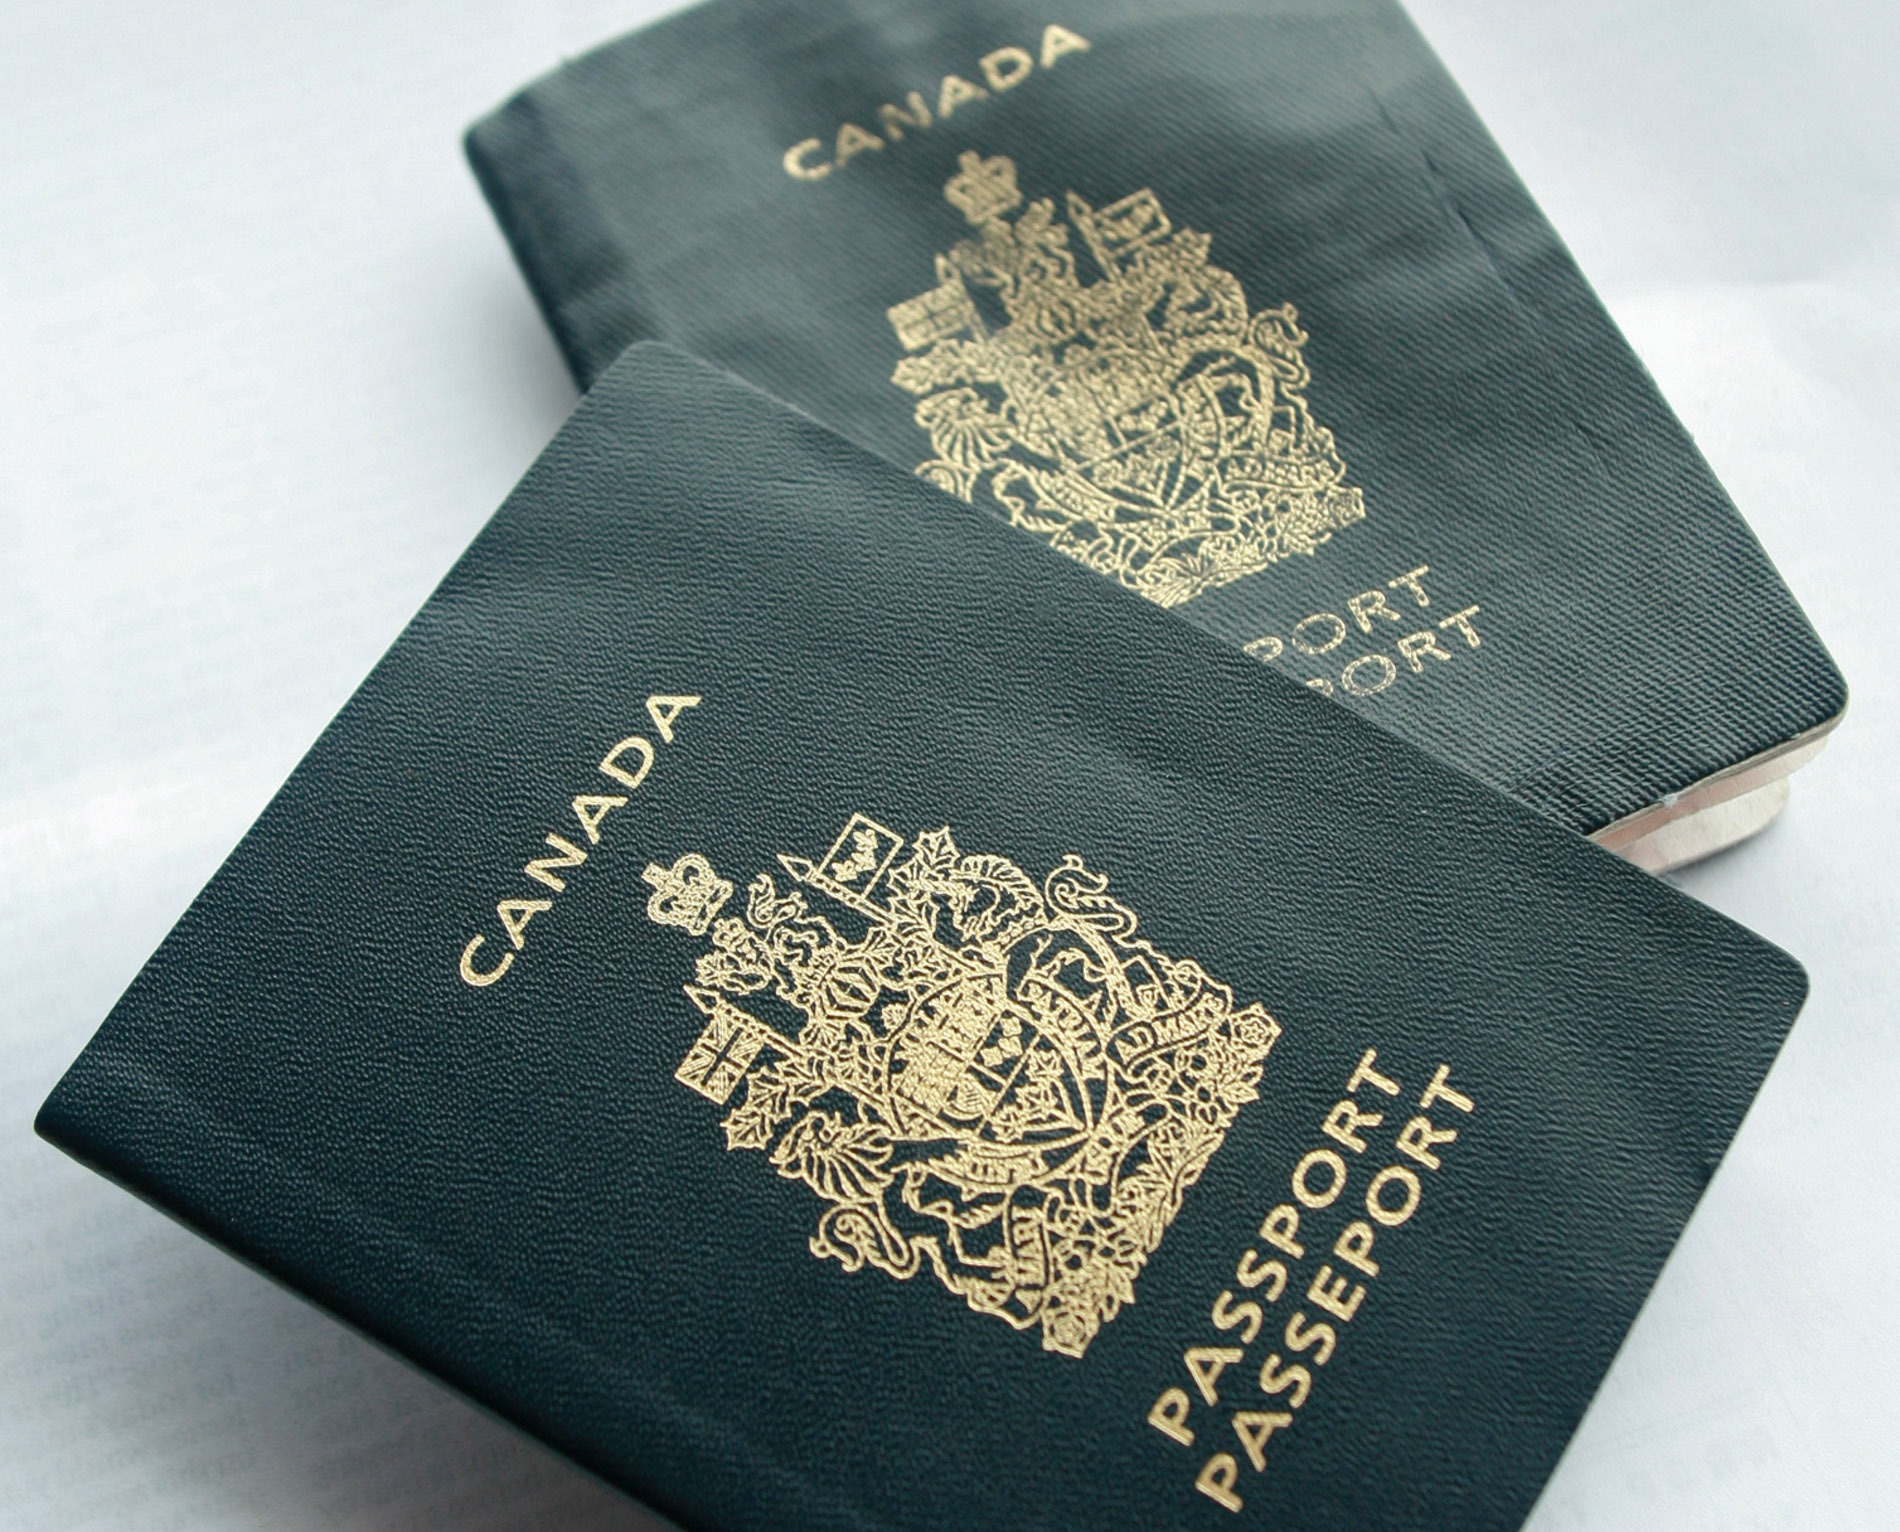 This Jan. 22. 2007 file photo shows two Canadian passports. (Norm Betts—Bloomberg/Getty Images)